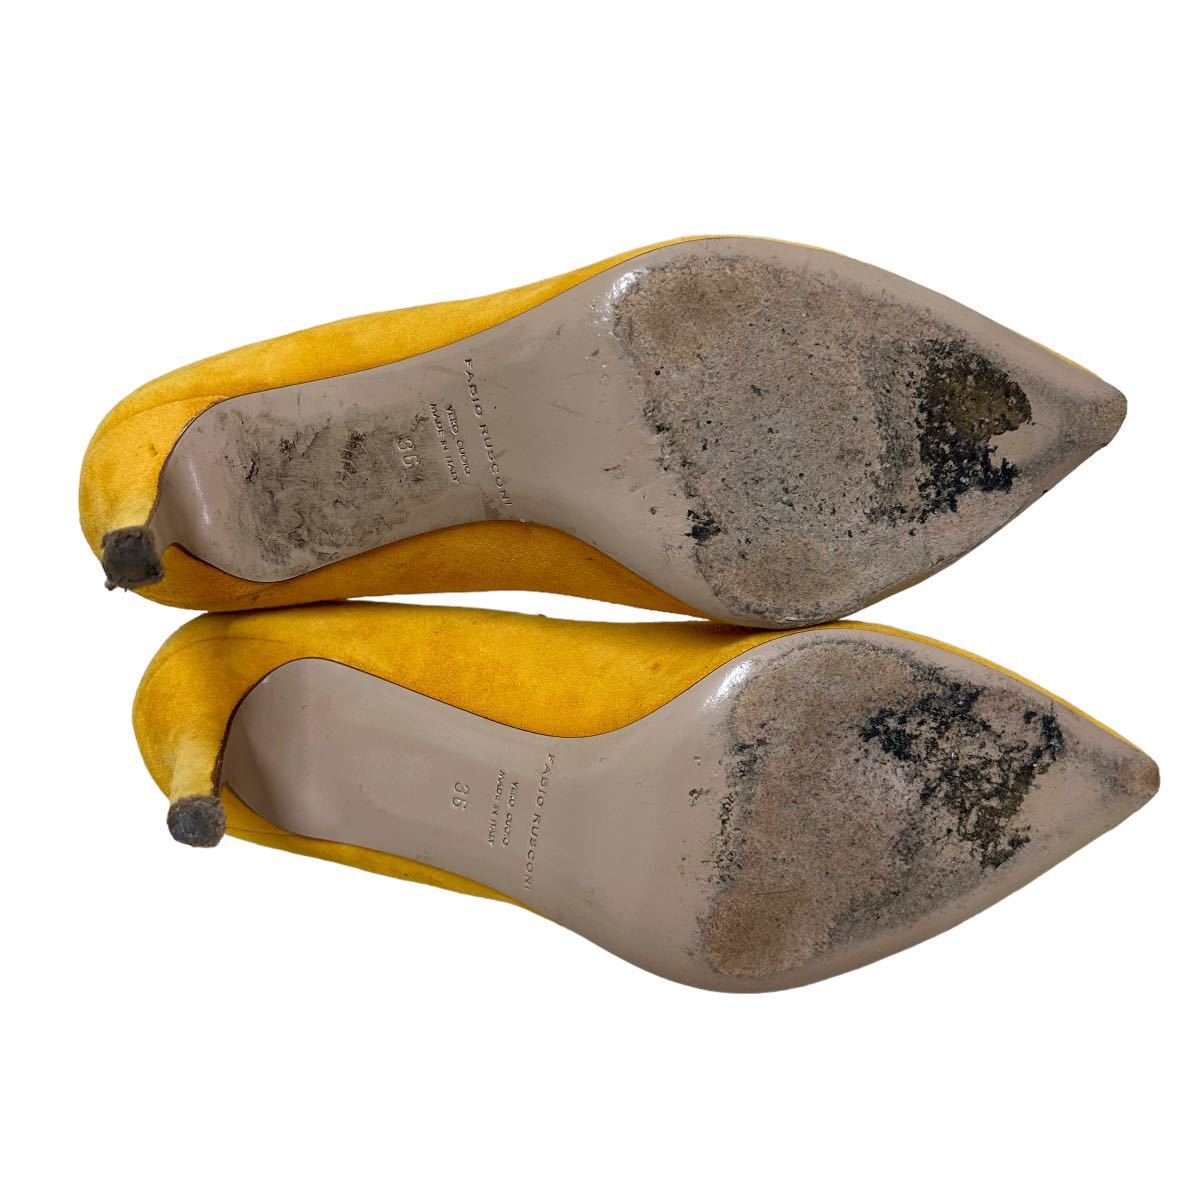 AM729 Italy made FABIO RUSCONI fabio rusko-ni lady's pumps 36 approximately 23cm yellow group suede pin heel sack attaching 